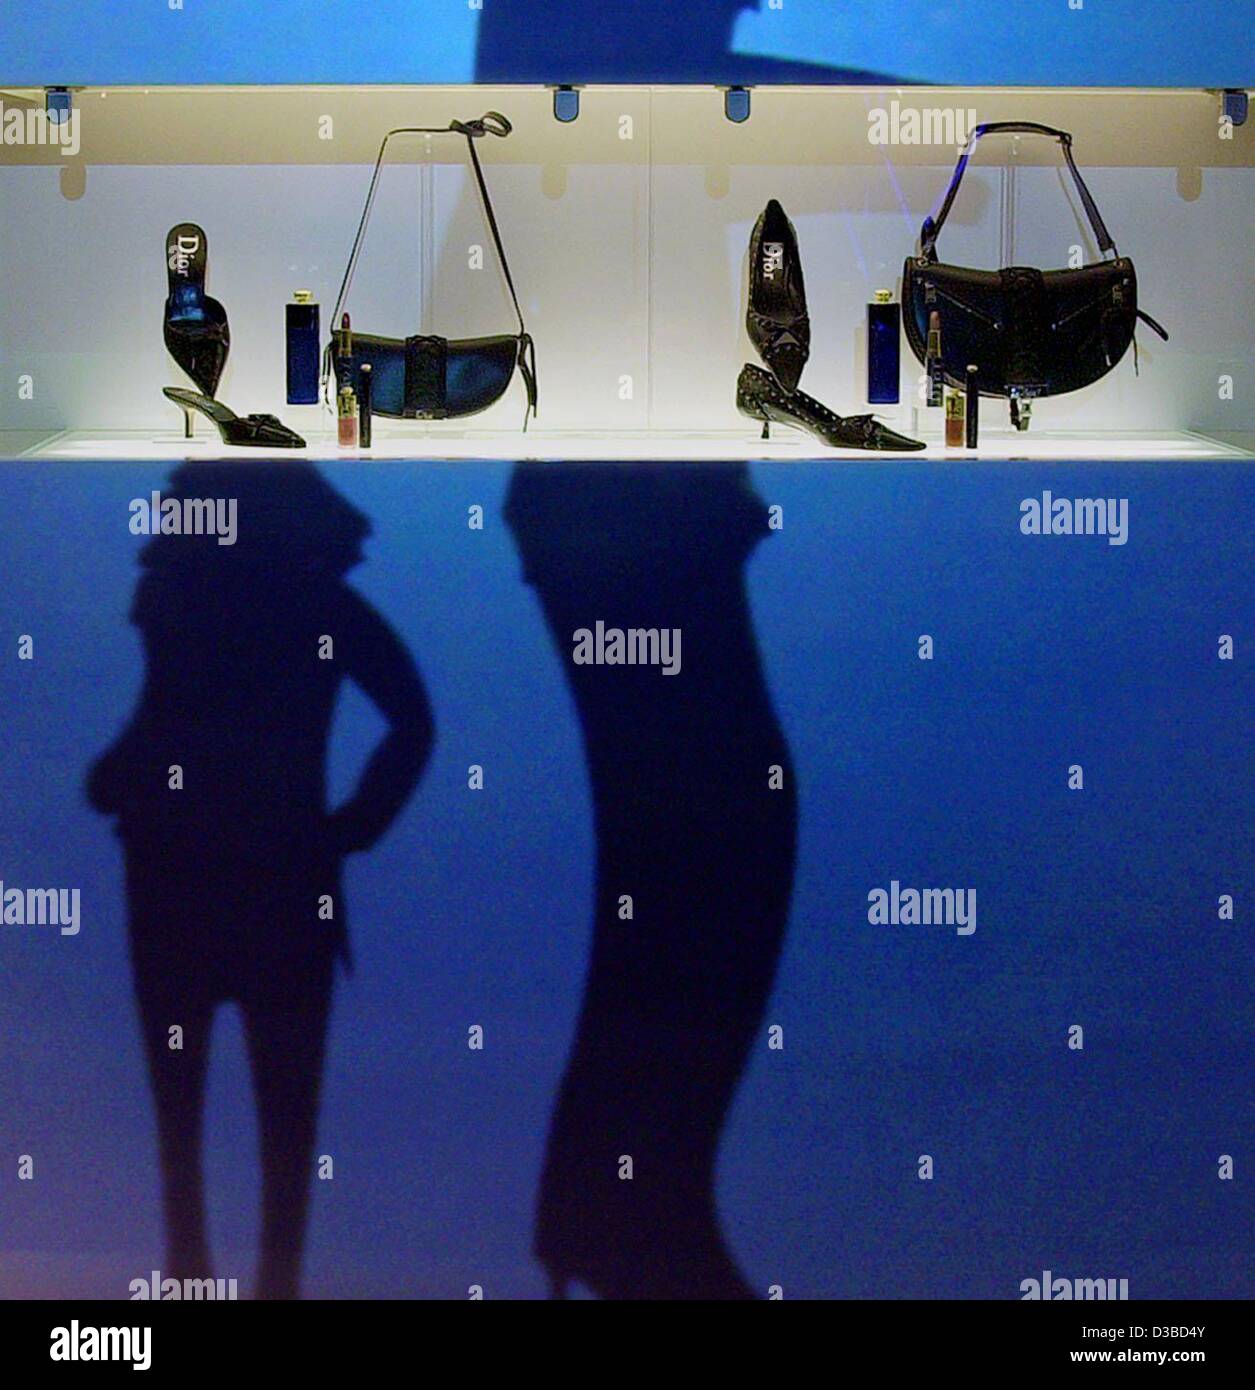 (dpa) - Human silhouettes enhance the display of ladies' accessories at Dior's booth at the beauty trade fair ('BeautyWorld 2003') in Frankfurt, Germany, 27 January 2003.  The accessories include cosmetics as well as evening shoes and handbags.  According to the fair's organizers, BeautyWorld is the Stock Photo